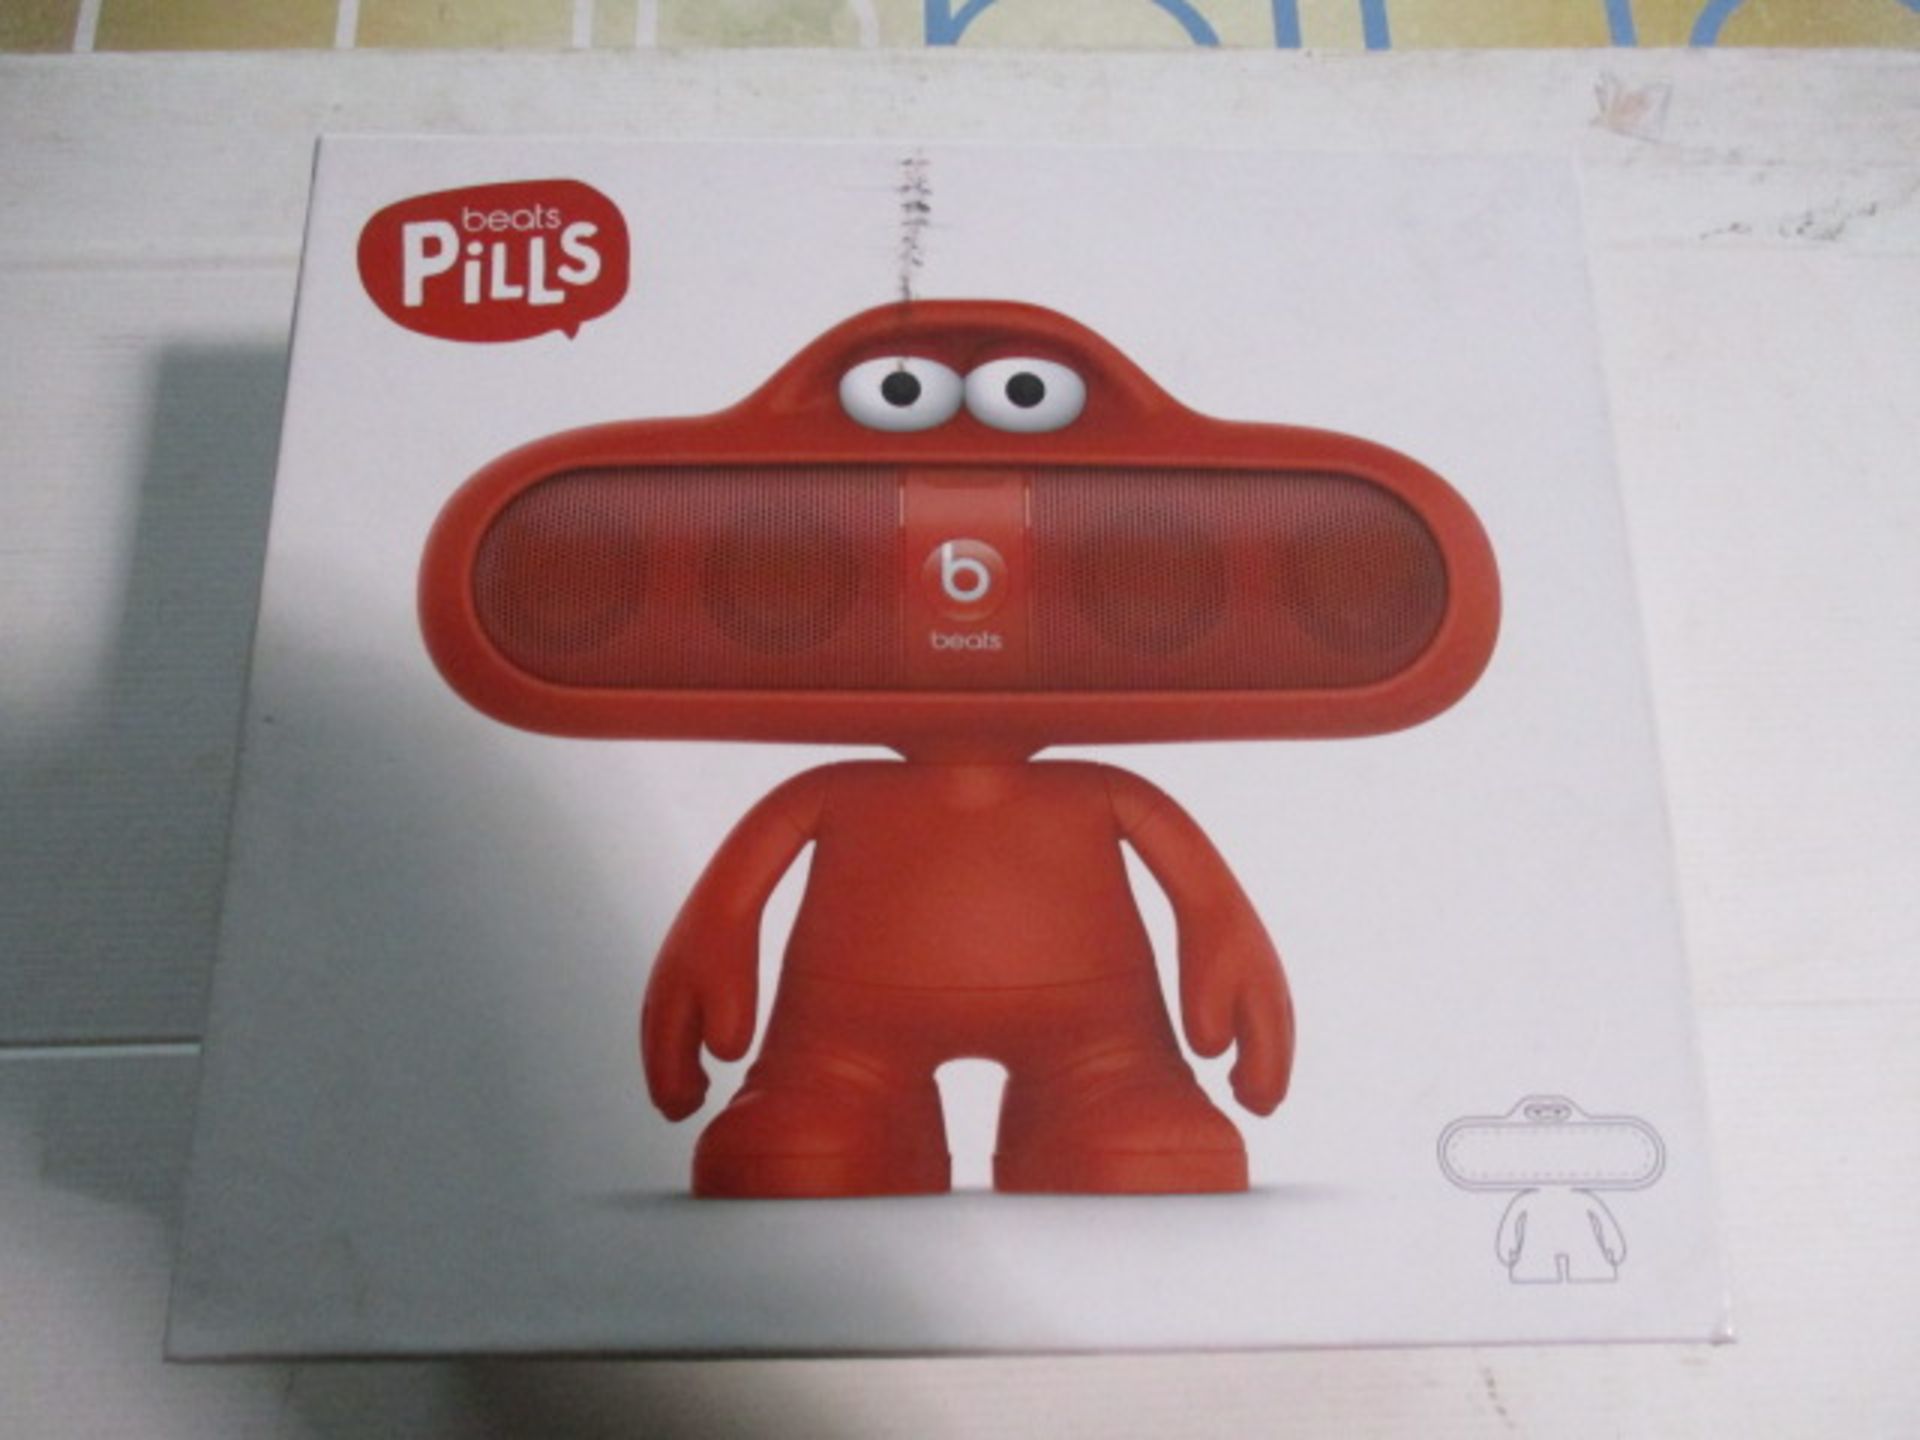 Beats Pills Holder boxed and unchecked uncheked - Image 2 of 2